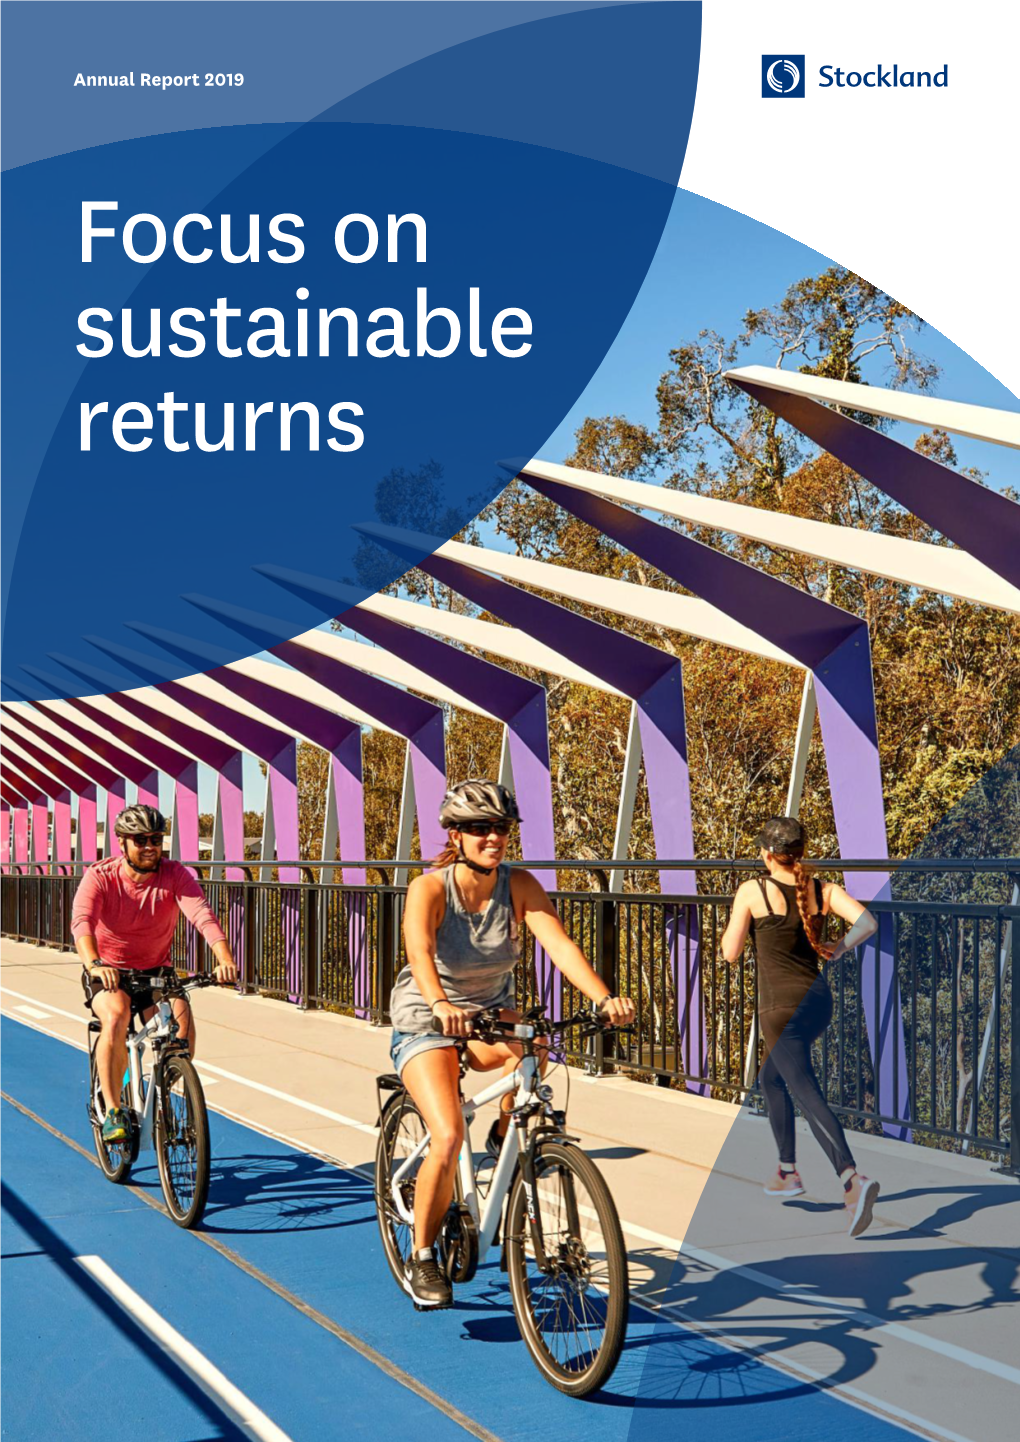 Annual Report 2019 Annual Report 2019 Annual Focus on Sustainable Returns ACKNOWLEDGEMENT of COUNTRY